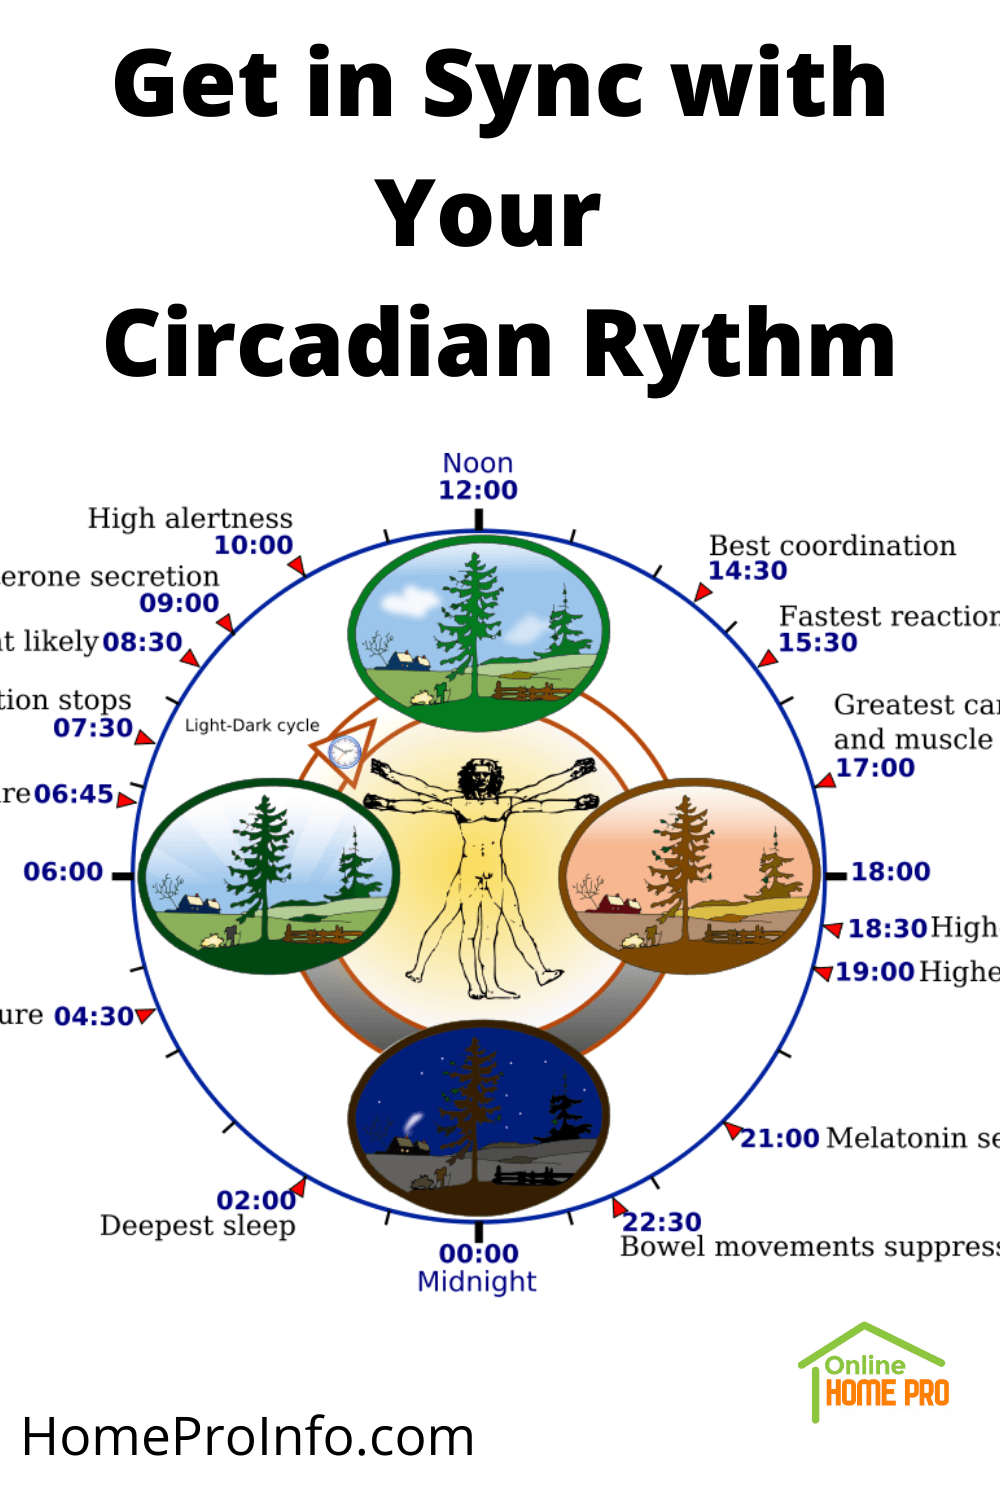 Get in sync with your circadian rhythm